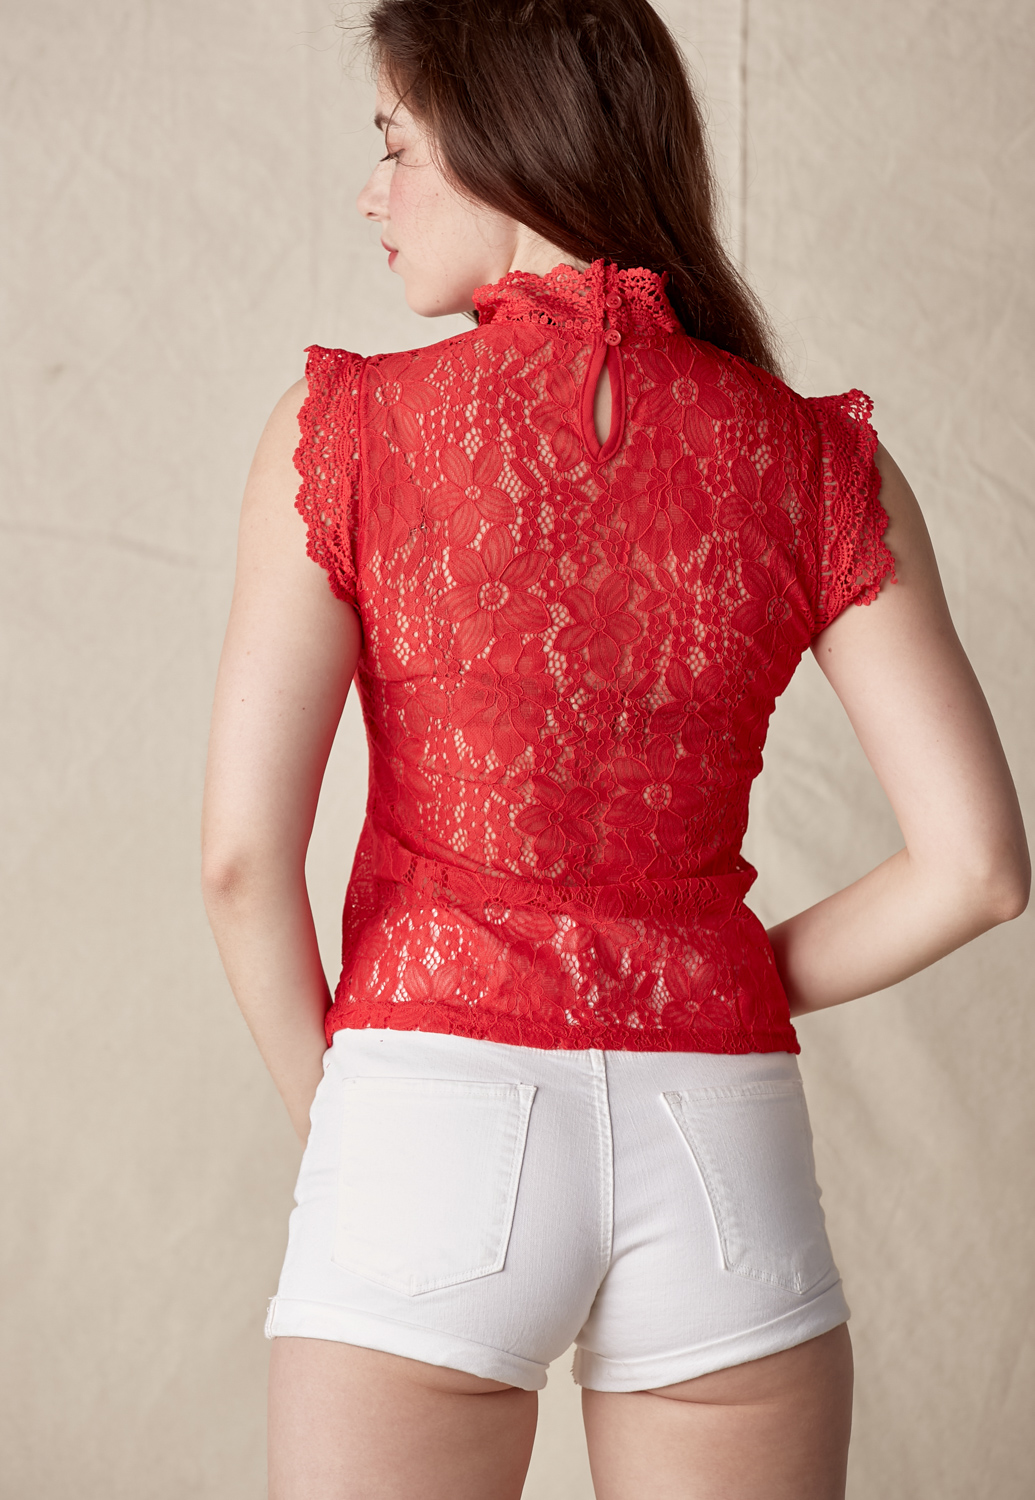 Floral Lace See-Though Top